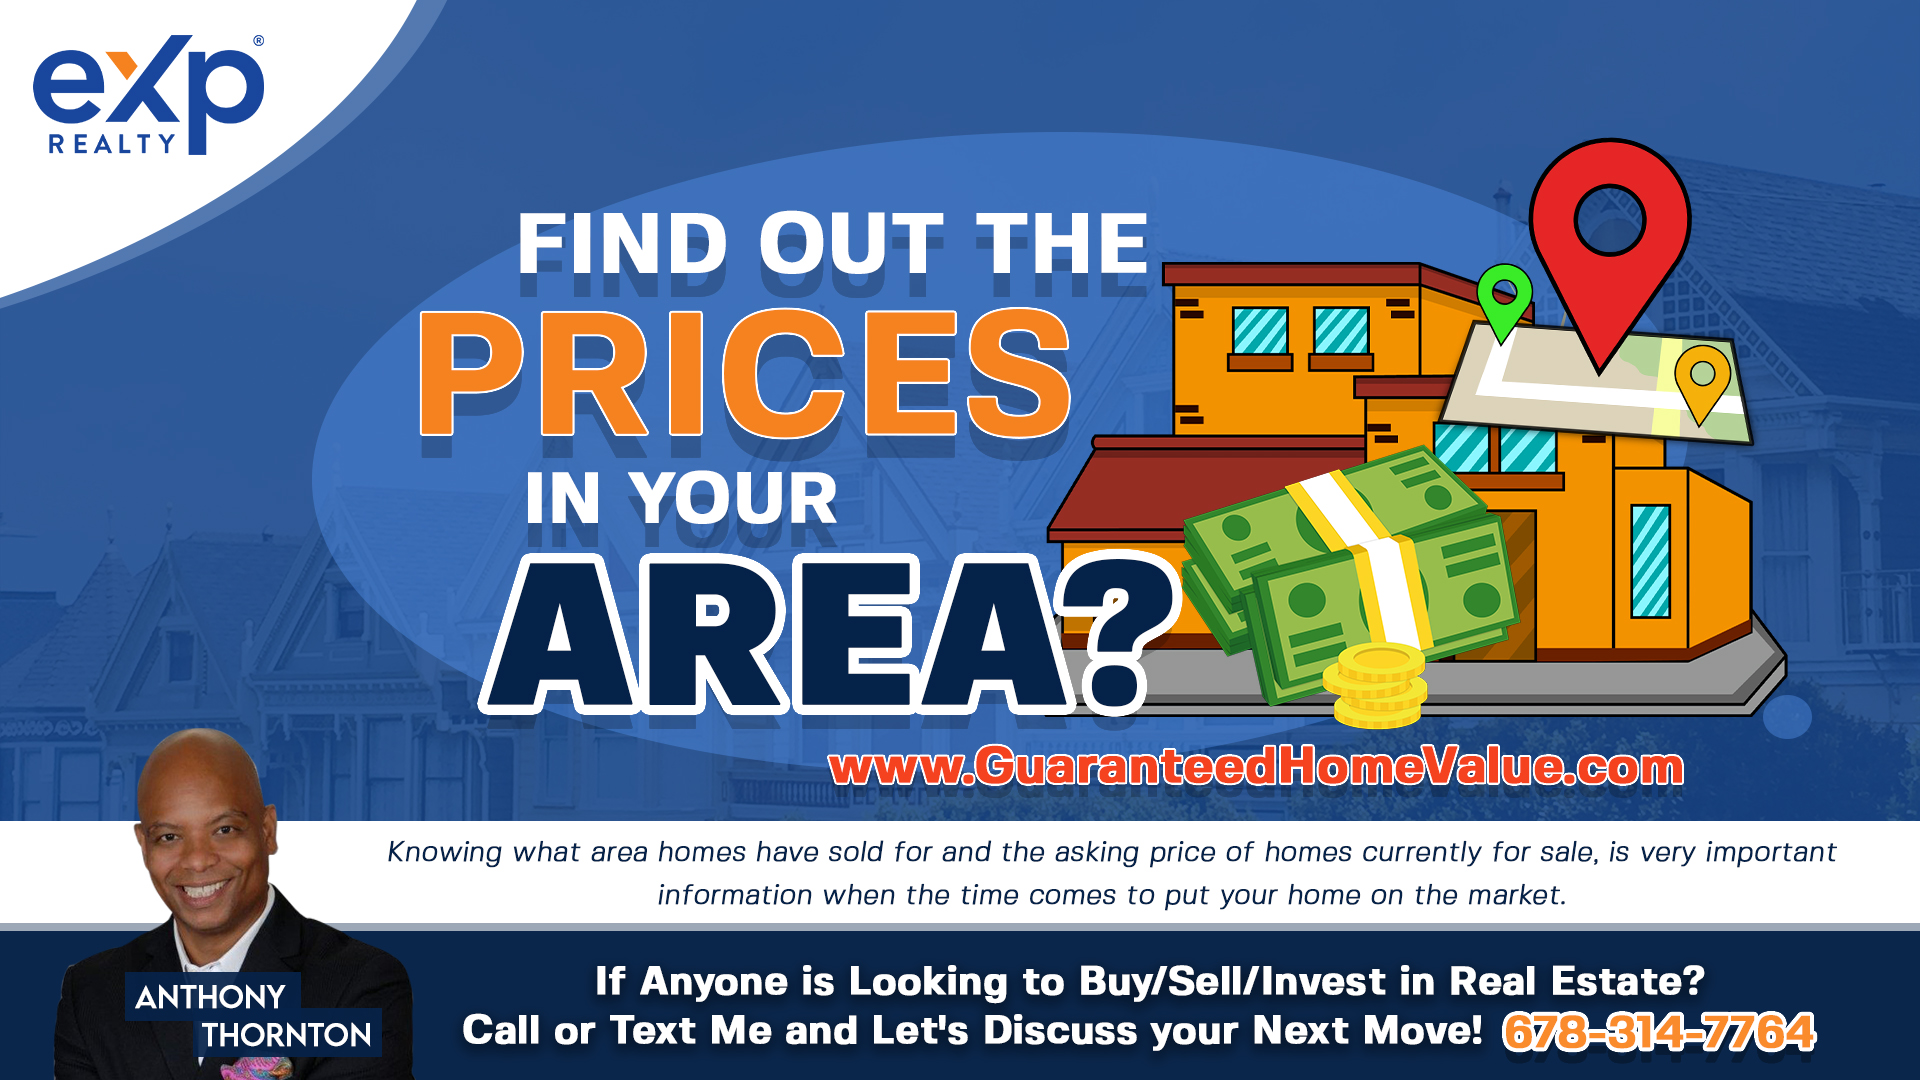 Find out prices in your area.jpg